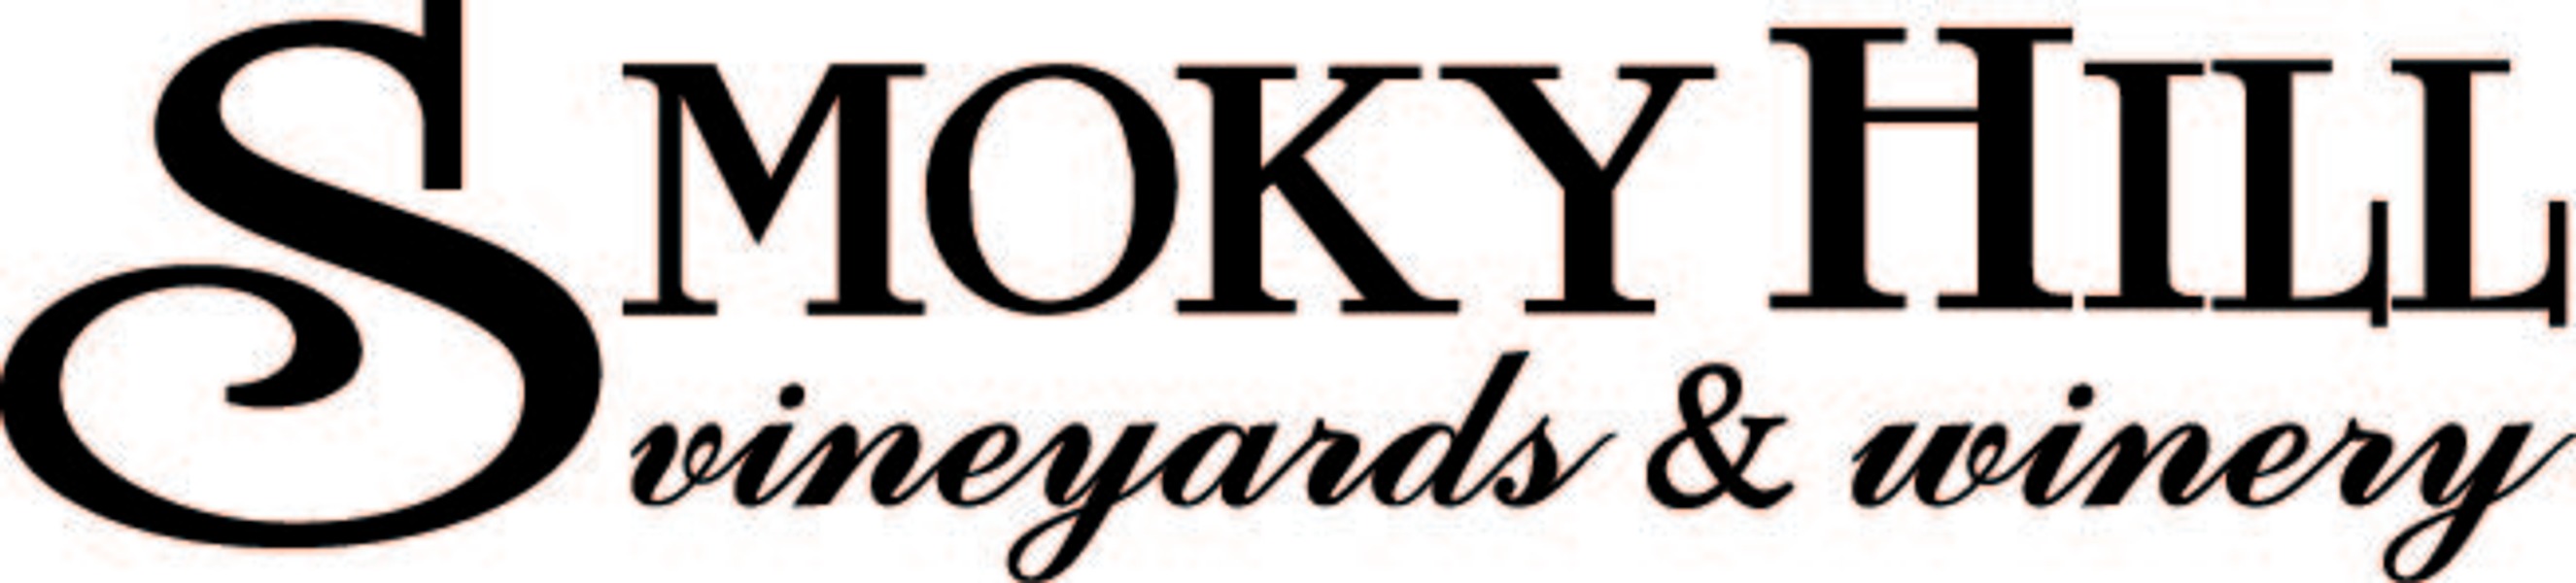 Logo for Smoky Hill Vineyards & Winery